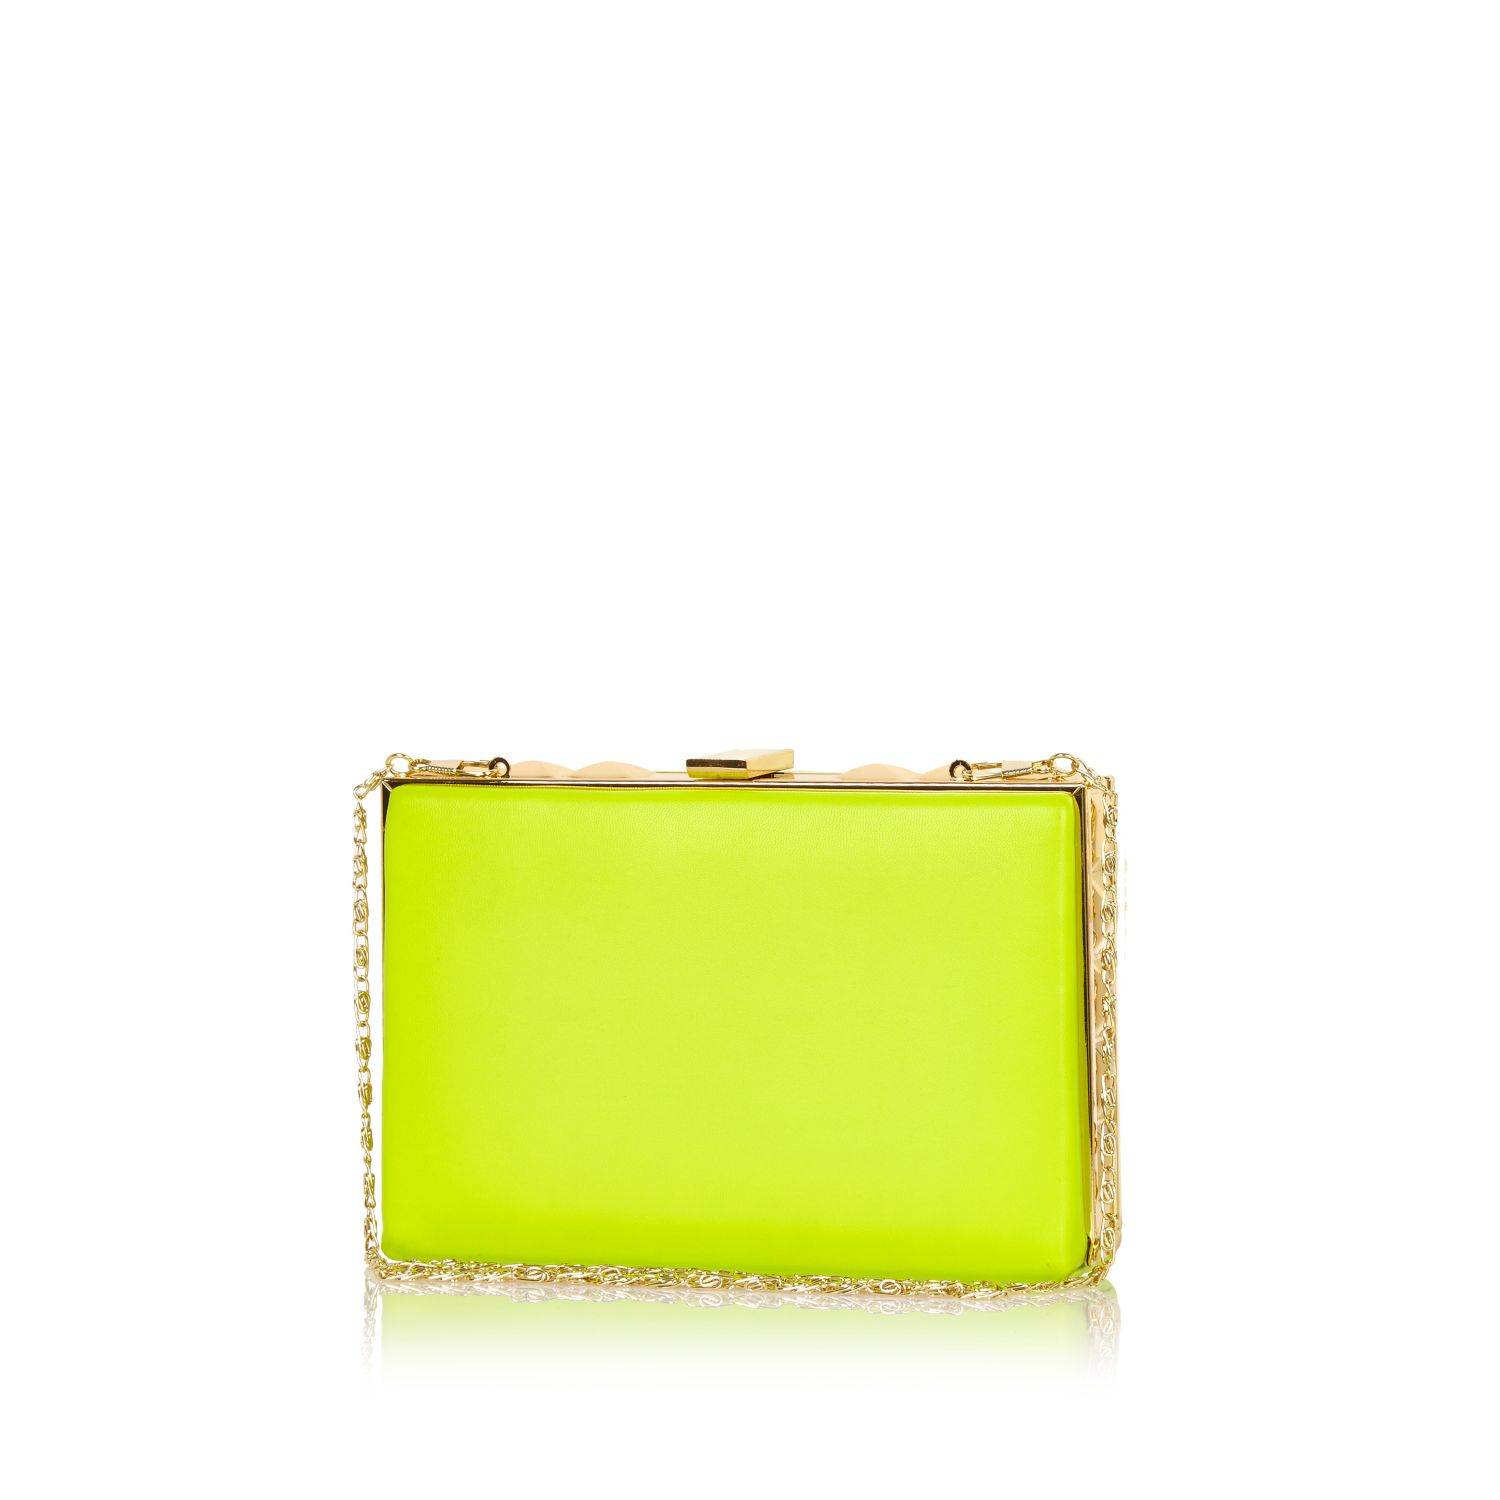 River Island Lime Box Clutch Bag in Yellow (Green) | Lyst